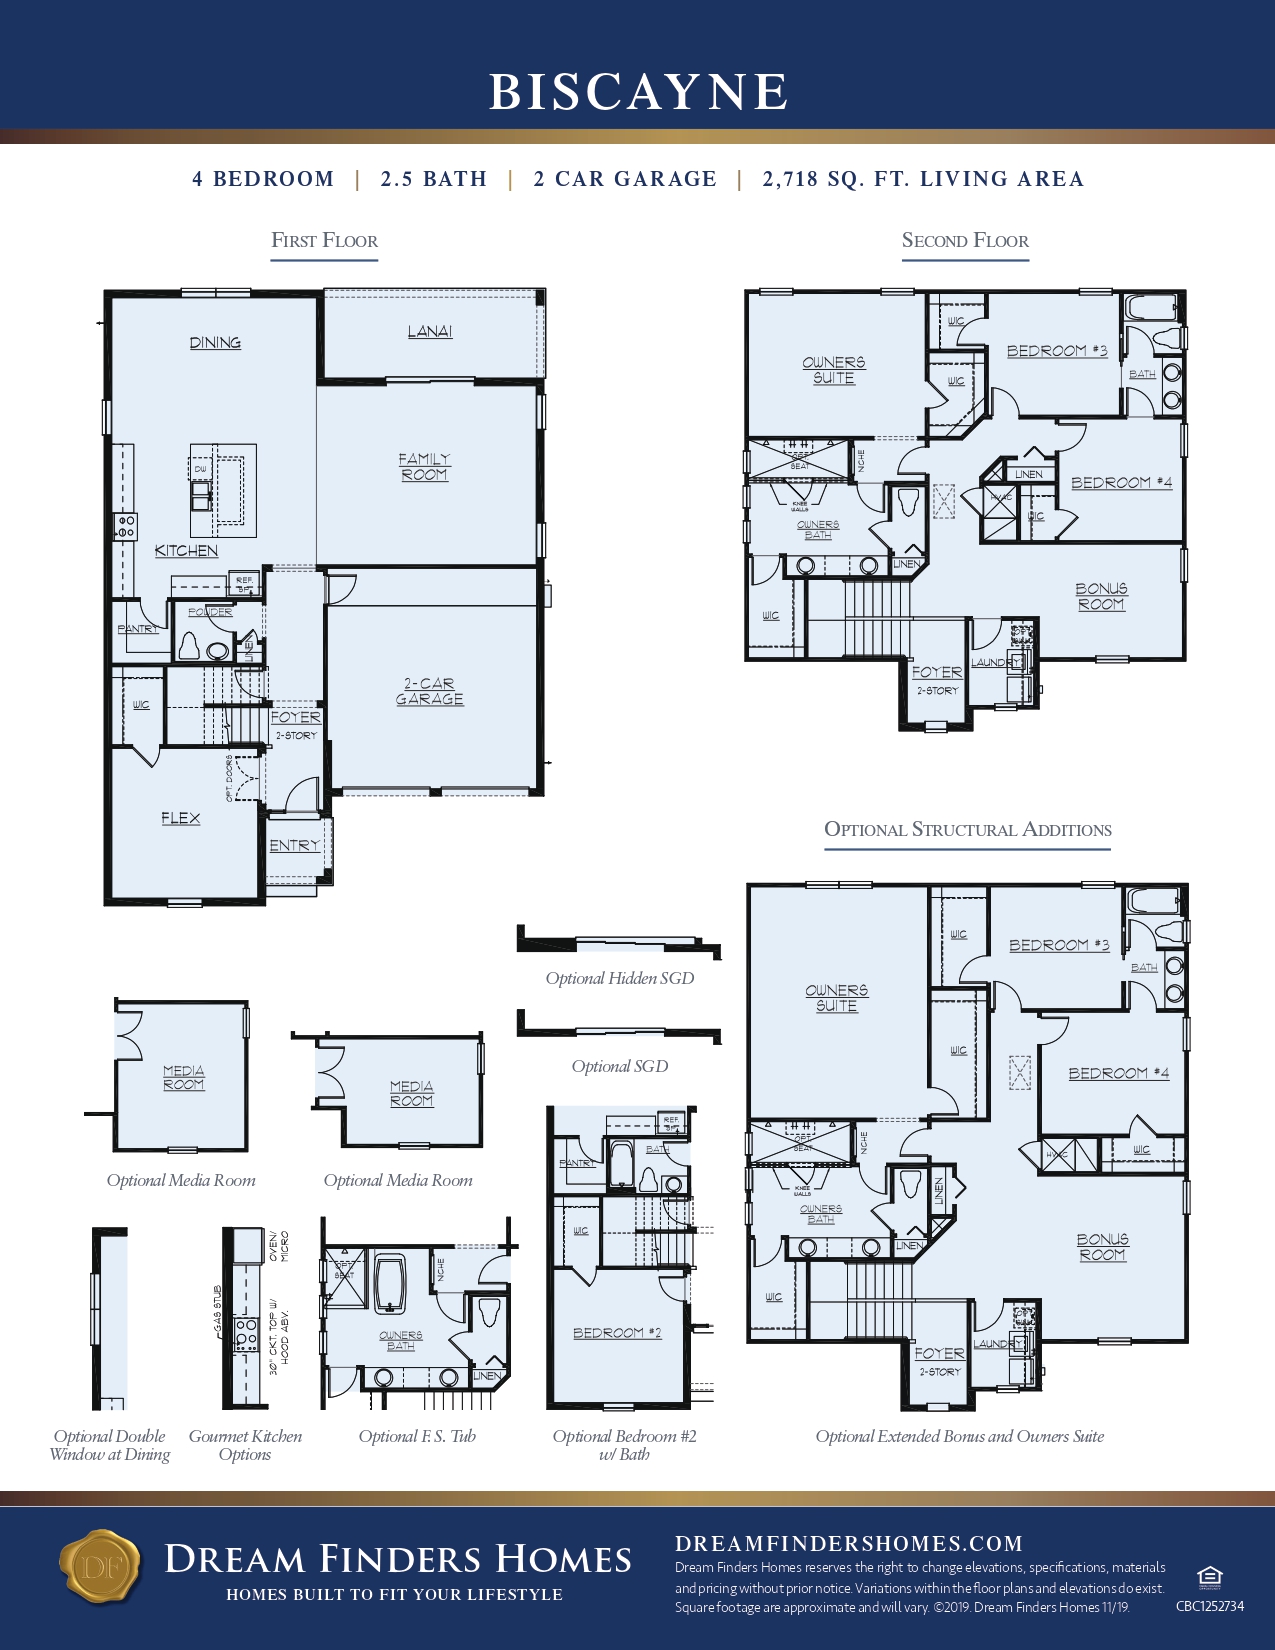 Biscayne house plan by Dream Finders Homes.